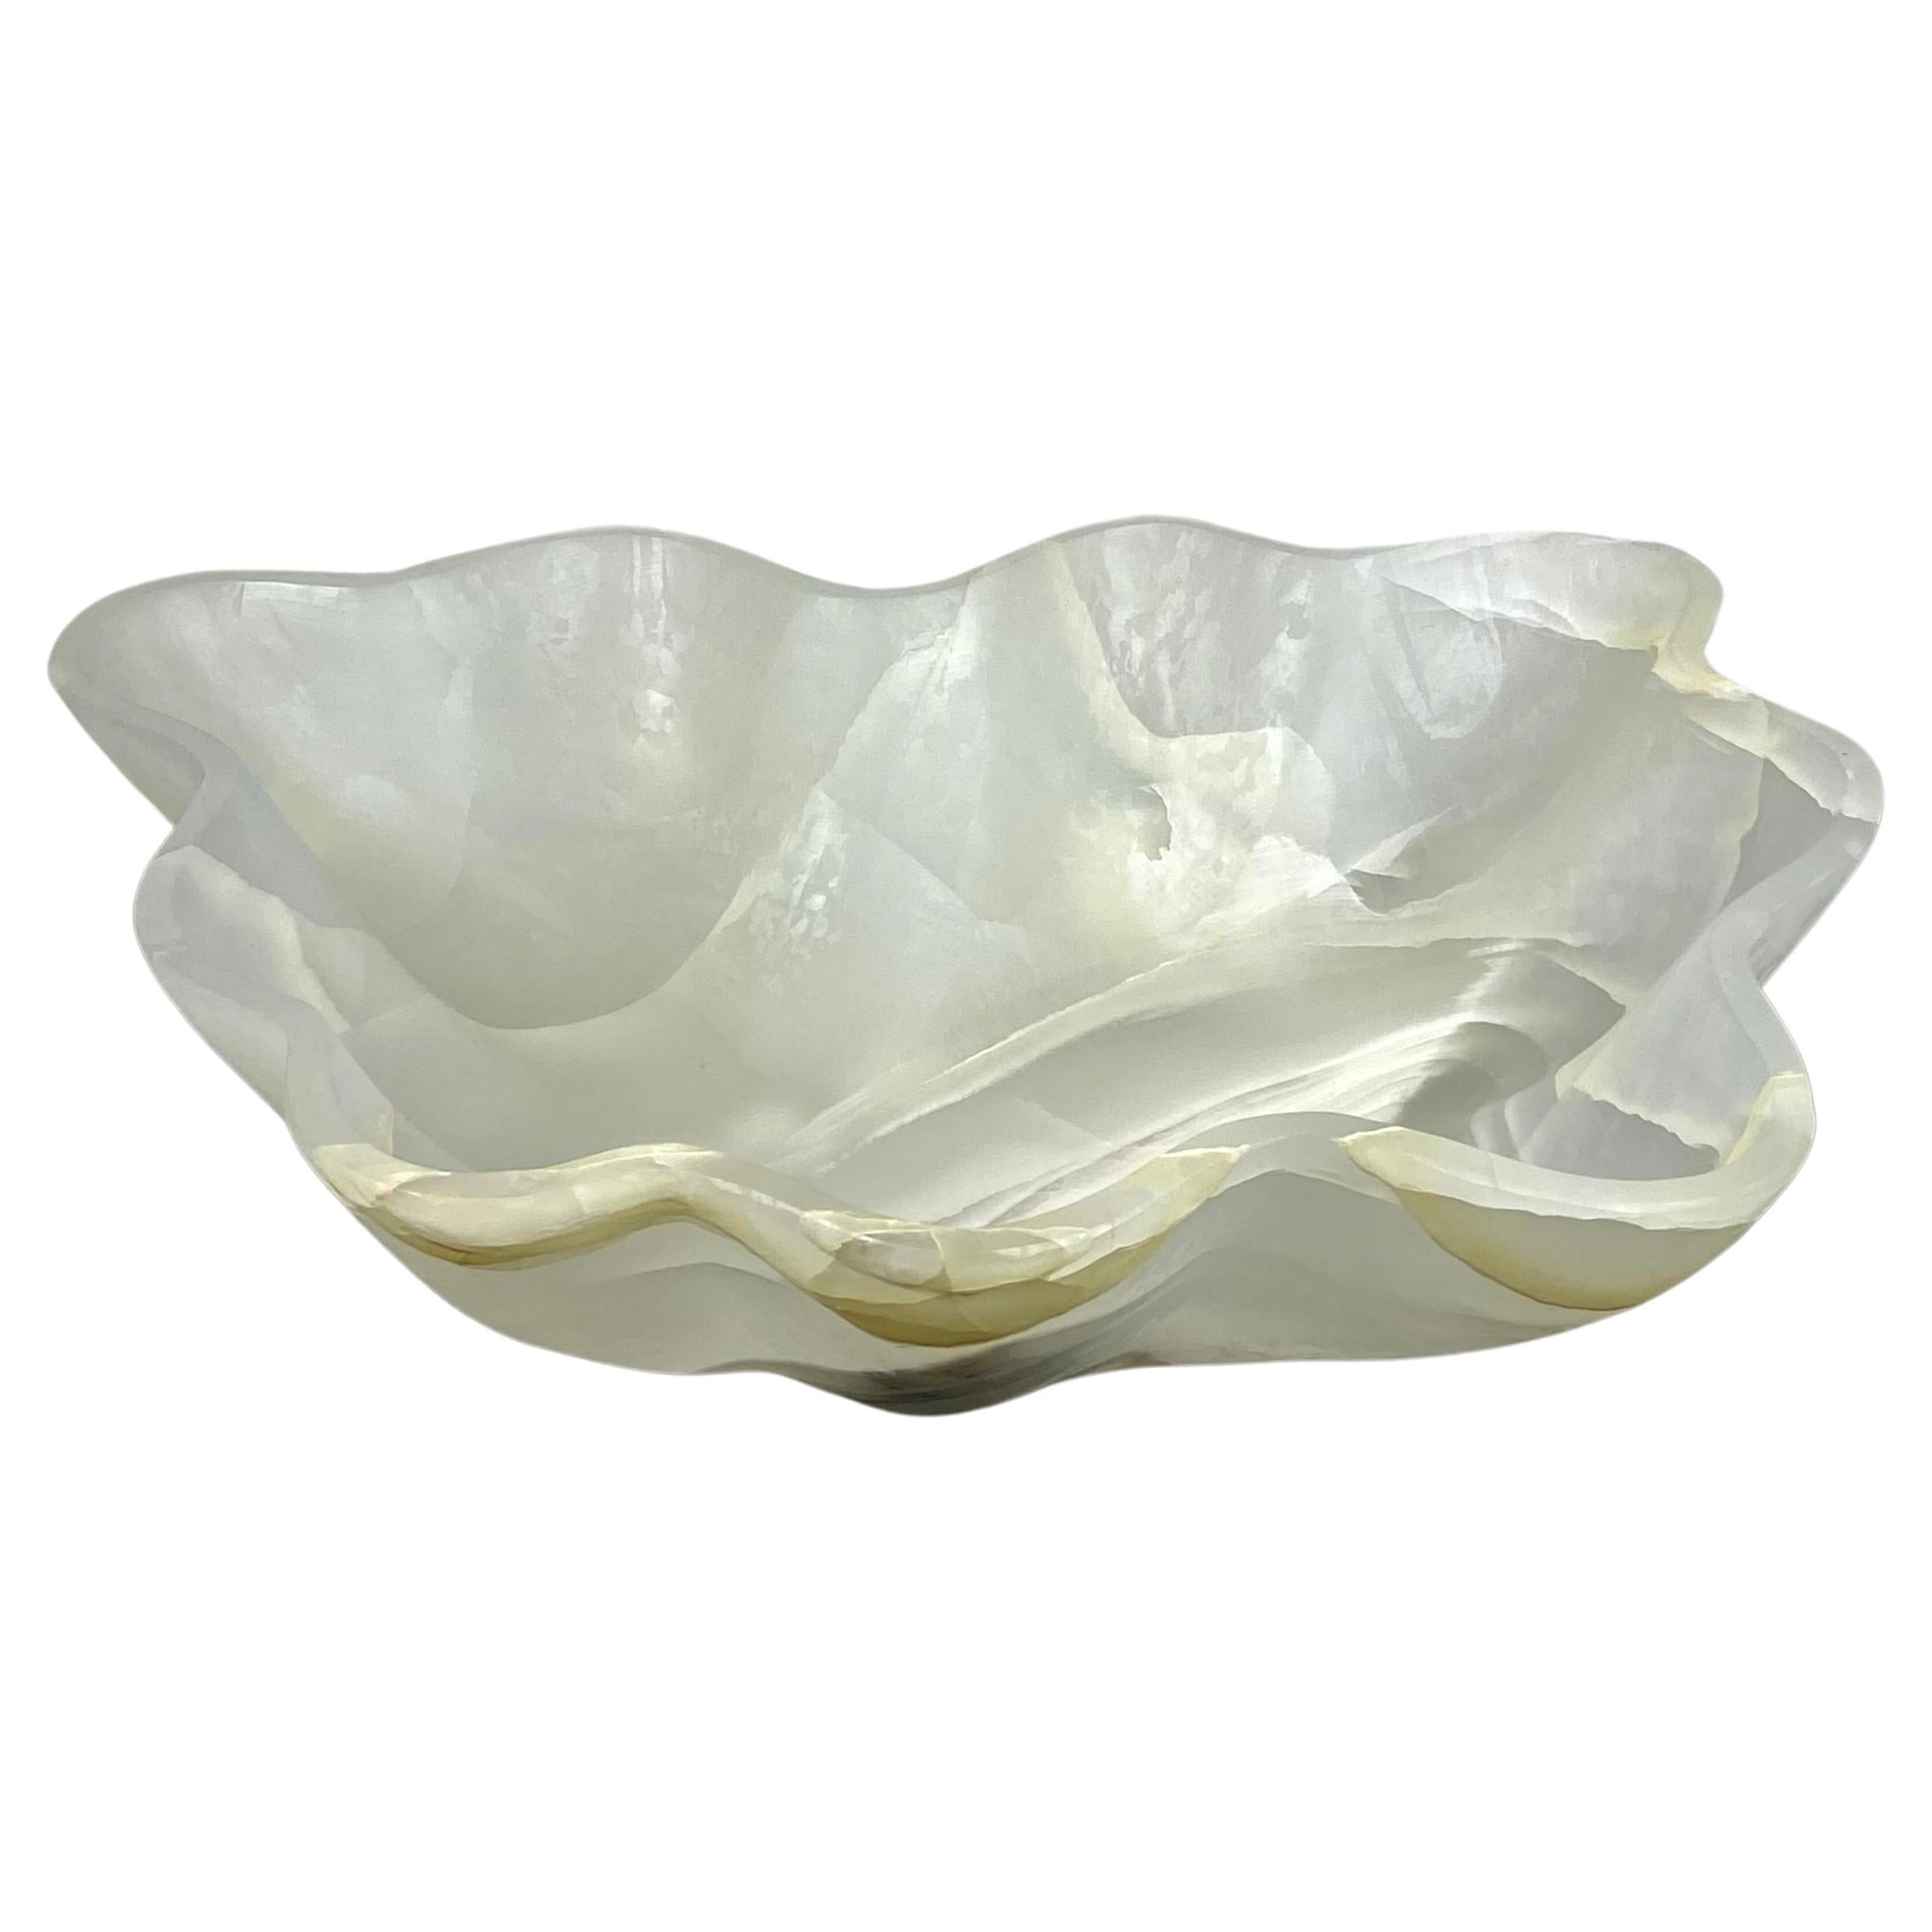 Off-White Large Hand-Carved Onyx Bowl For Sale